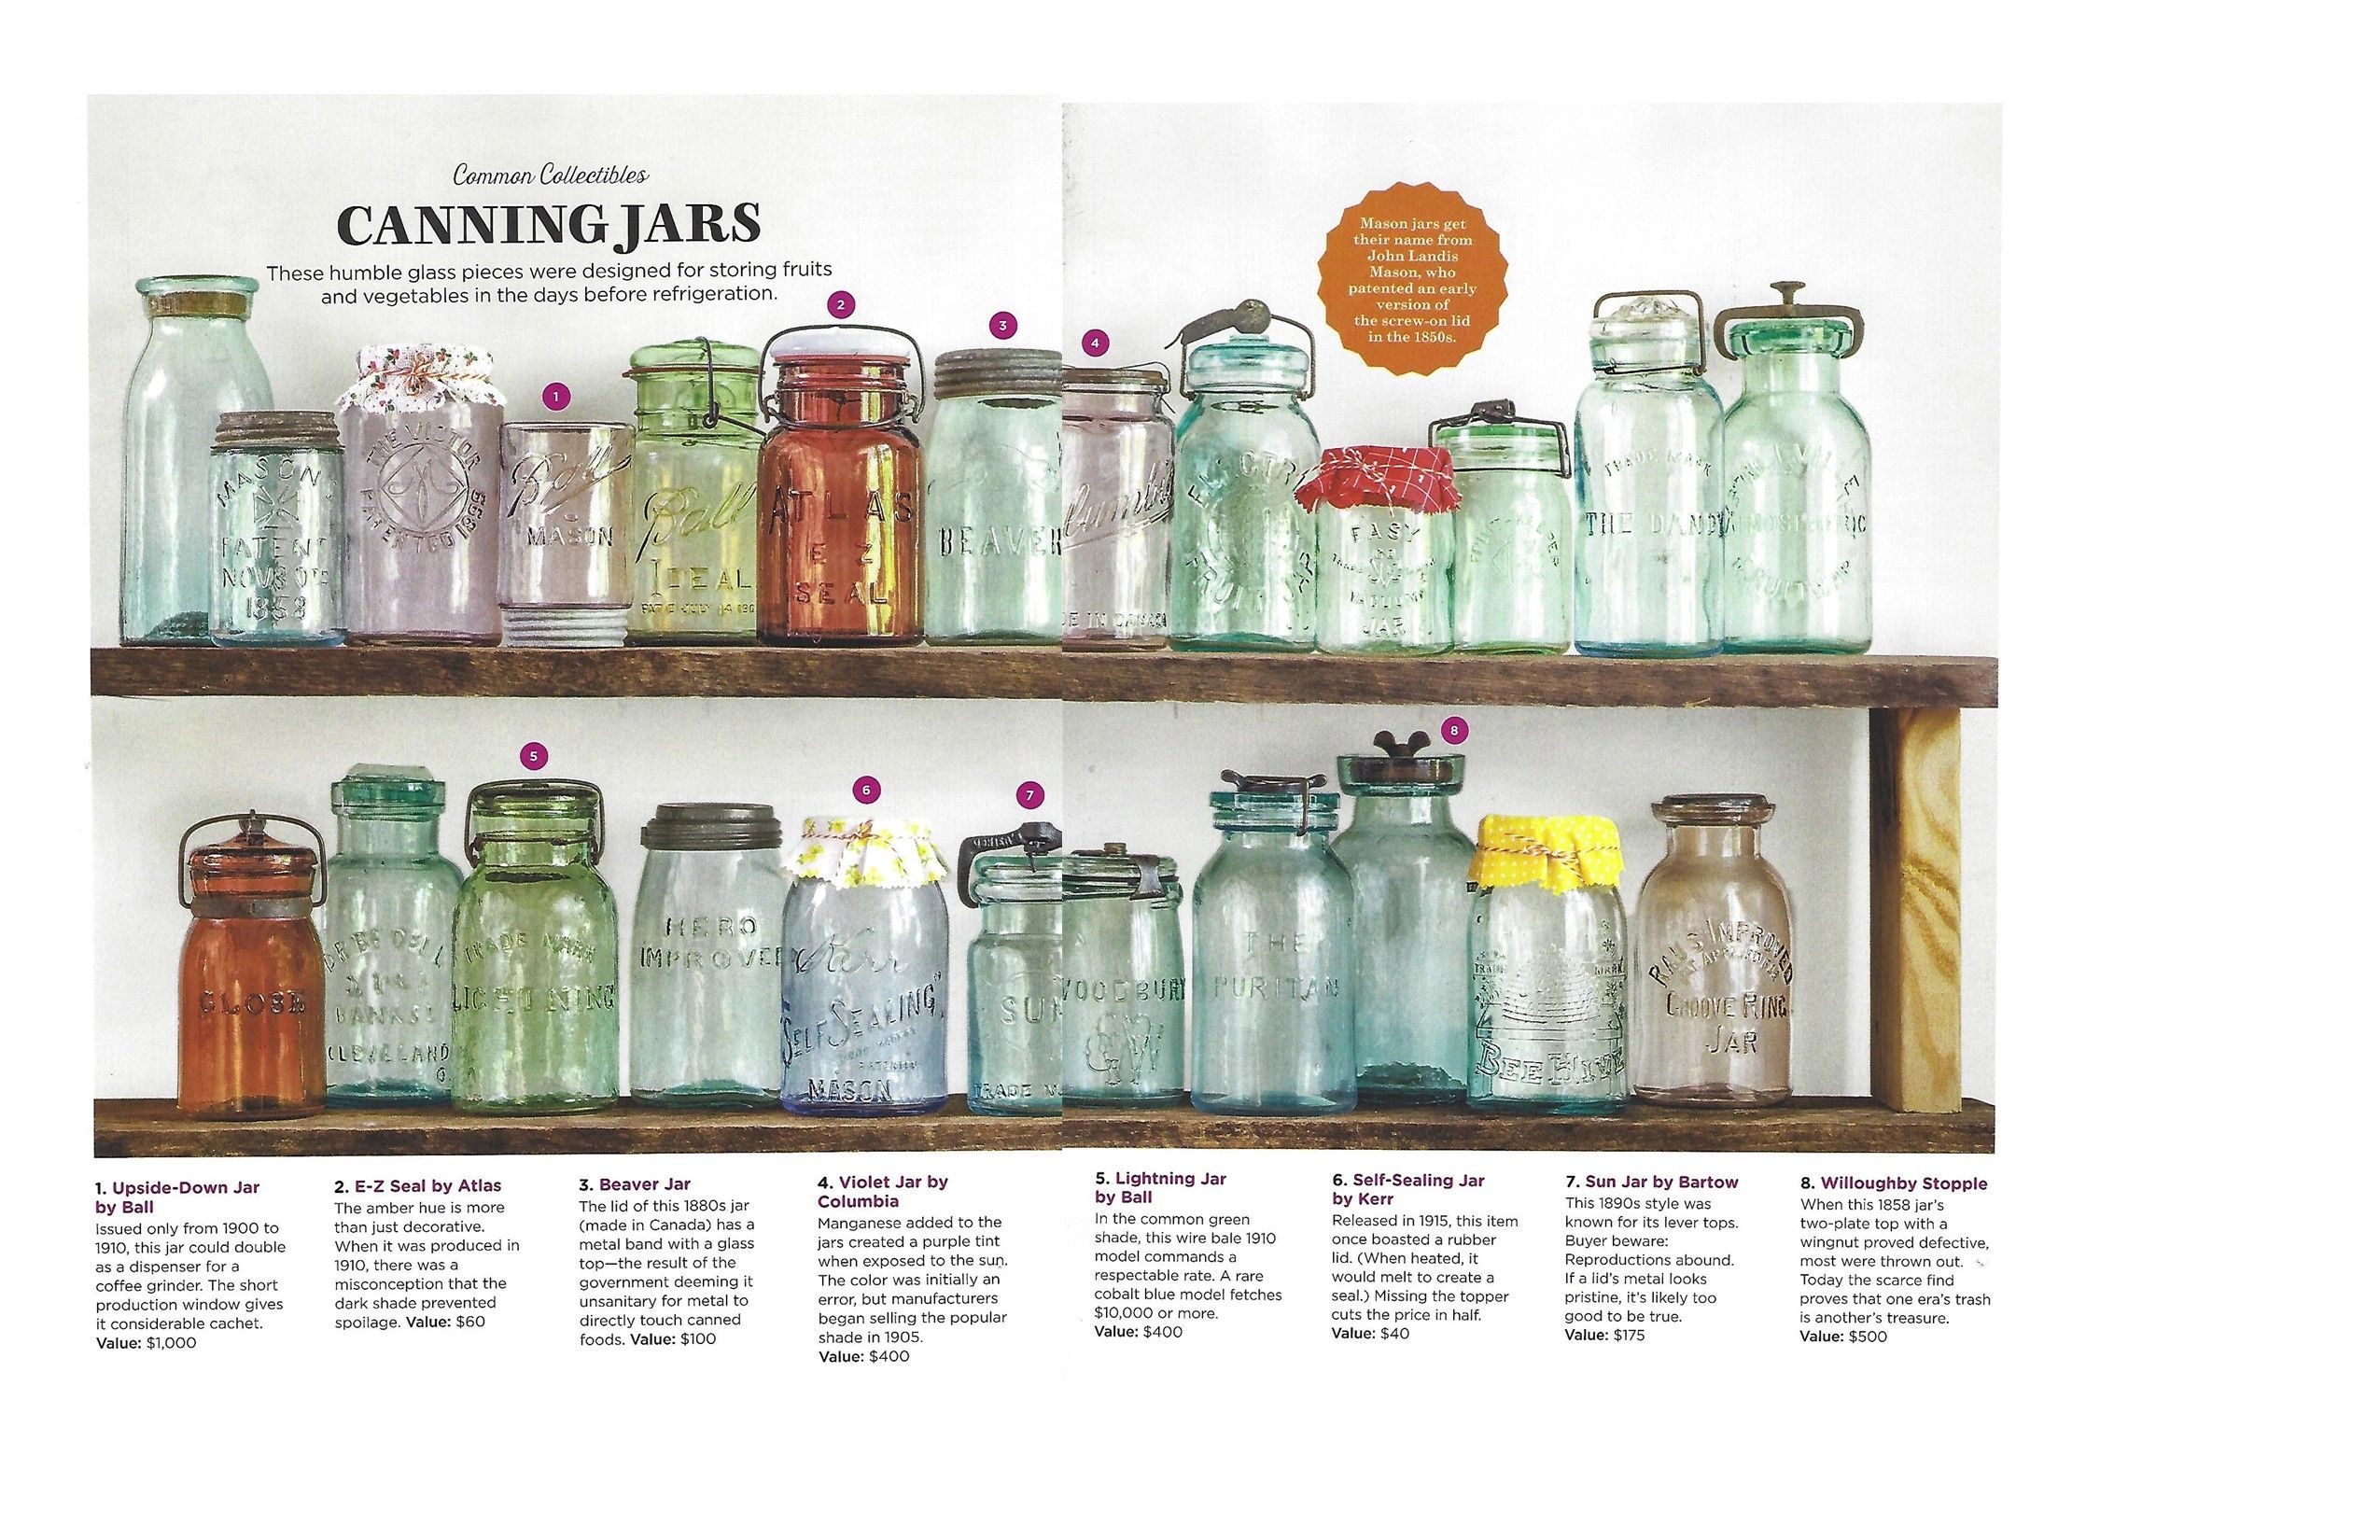 A Guide to Vintage Canning Jars [History & Values] • Adirondack Girl @ Heart